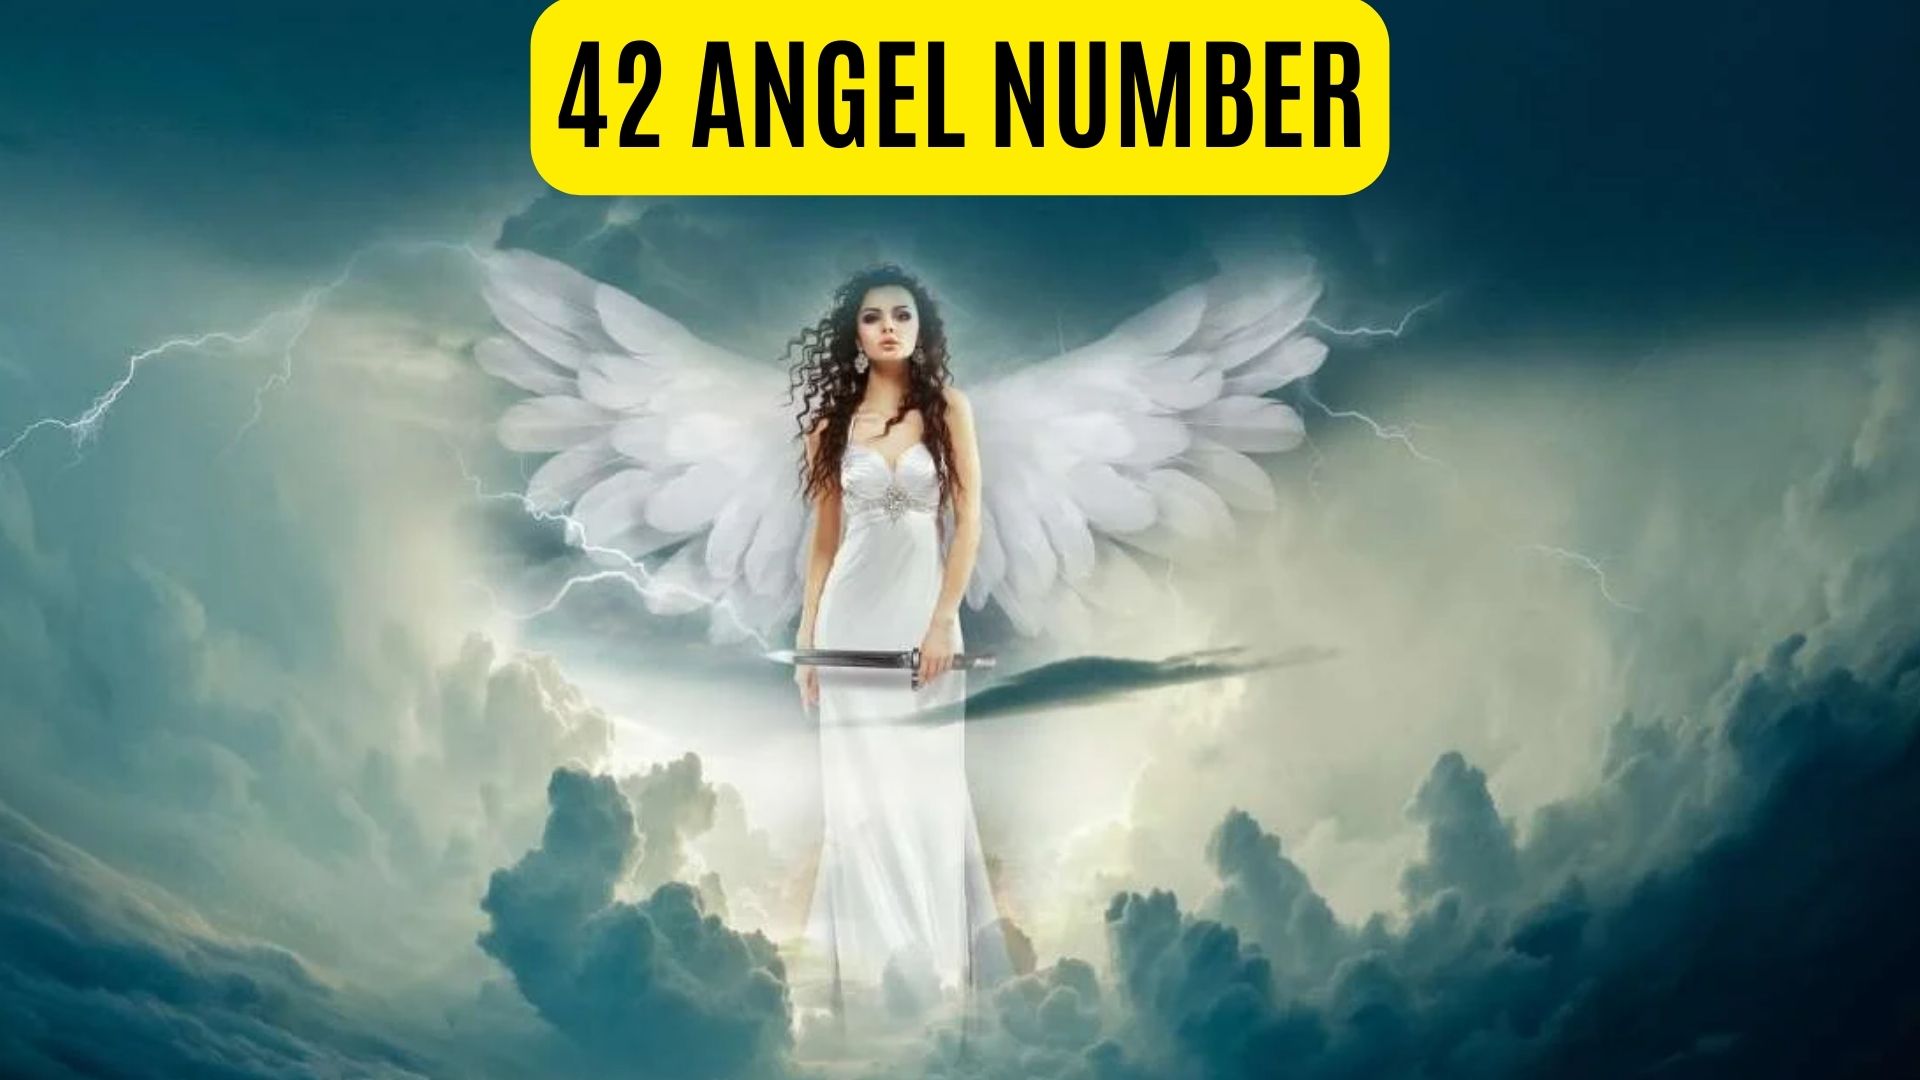 42 Angel Number Meaning - Keep Your Faith And Trust